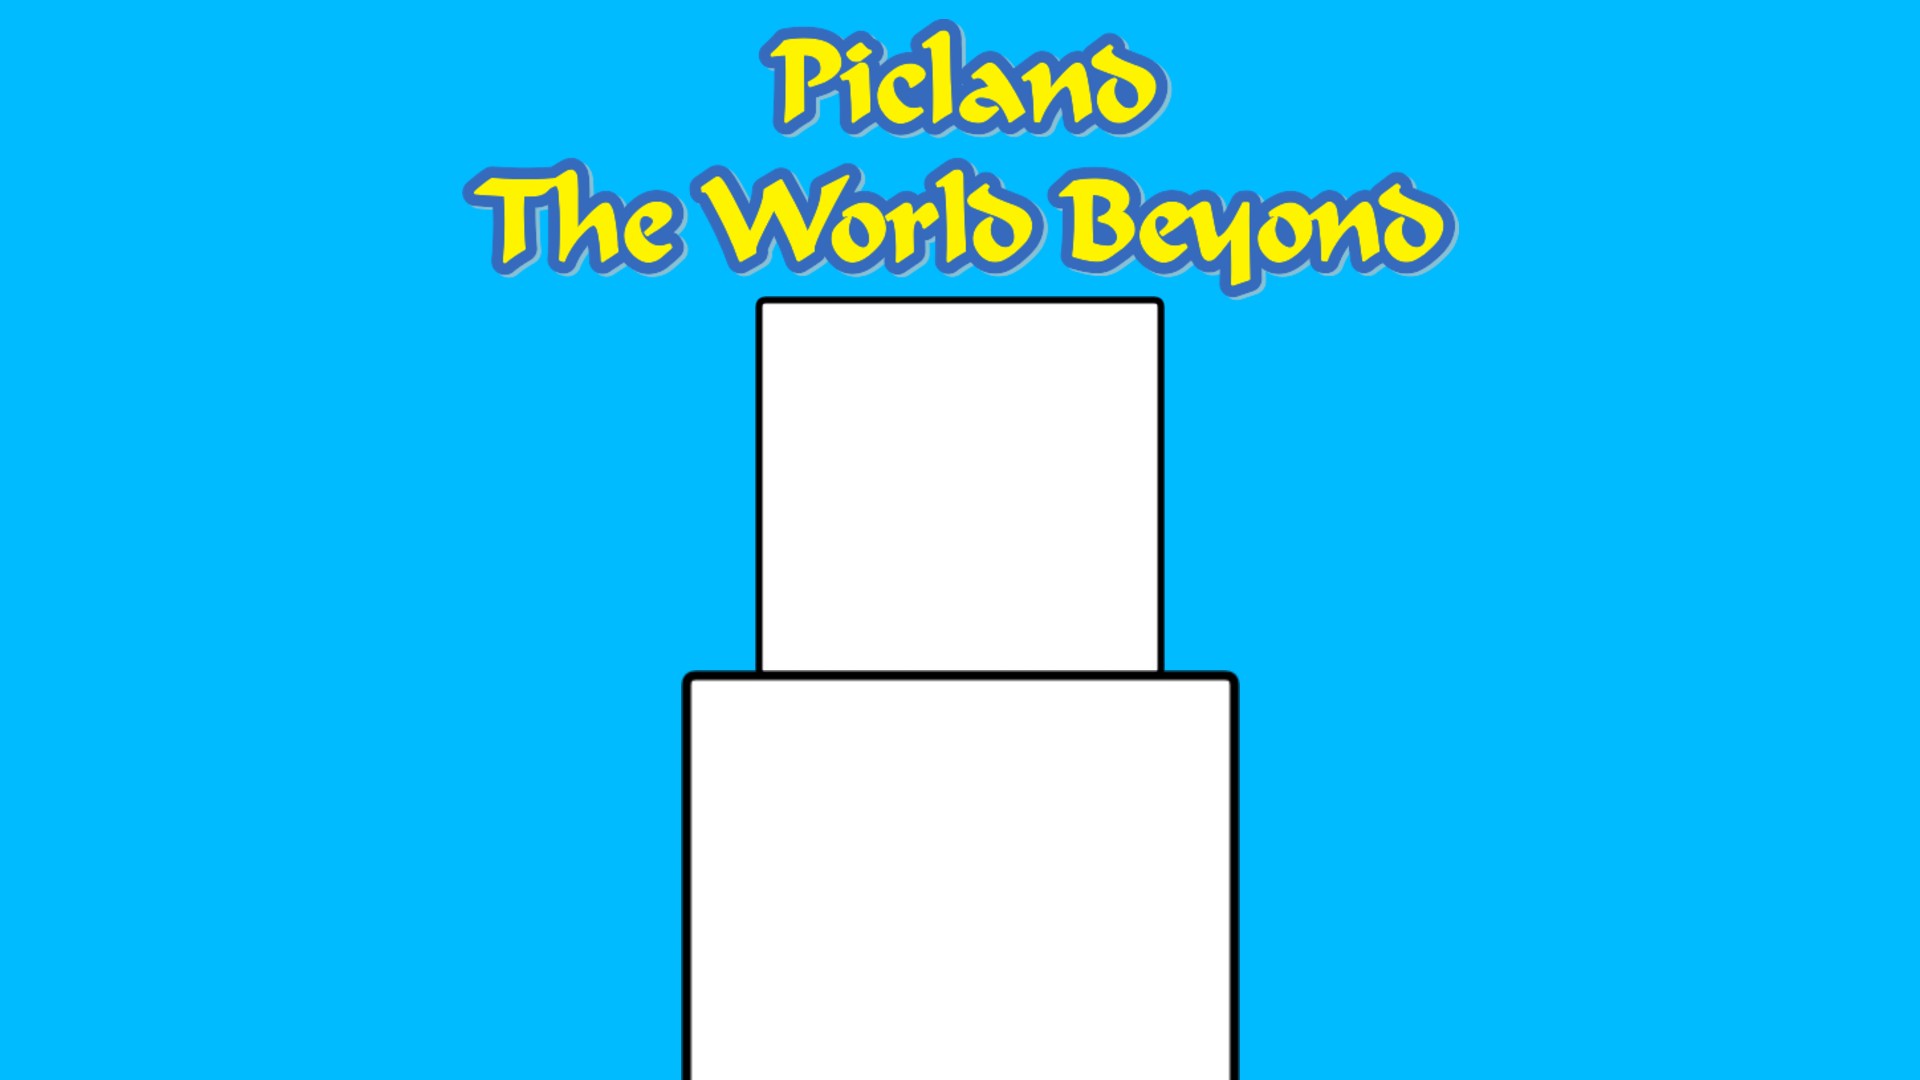 Picland: The World Beyond